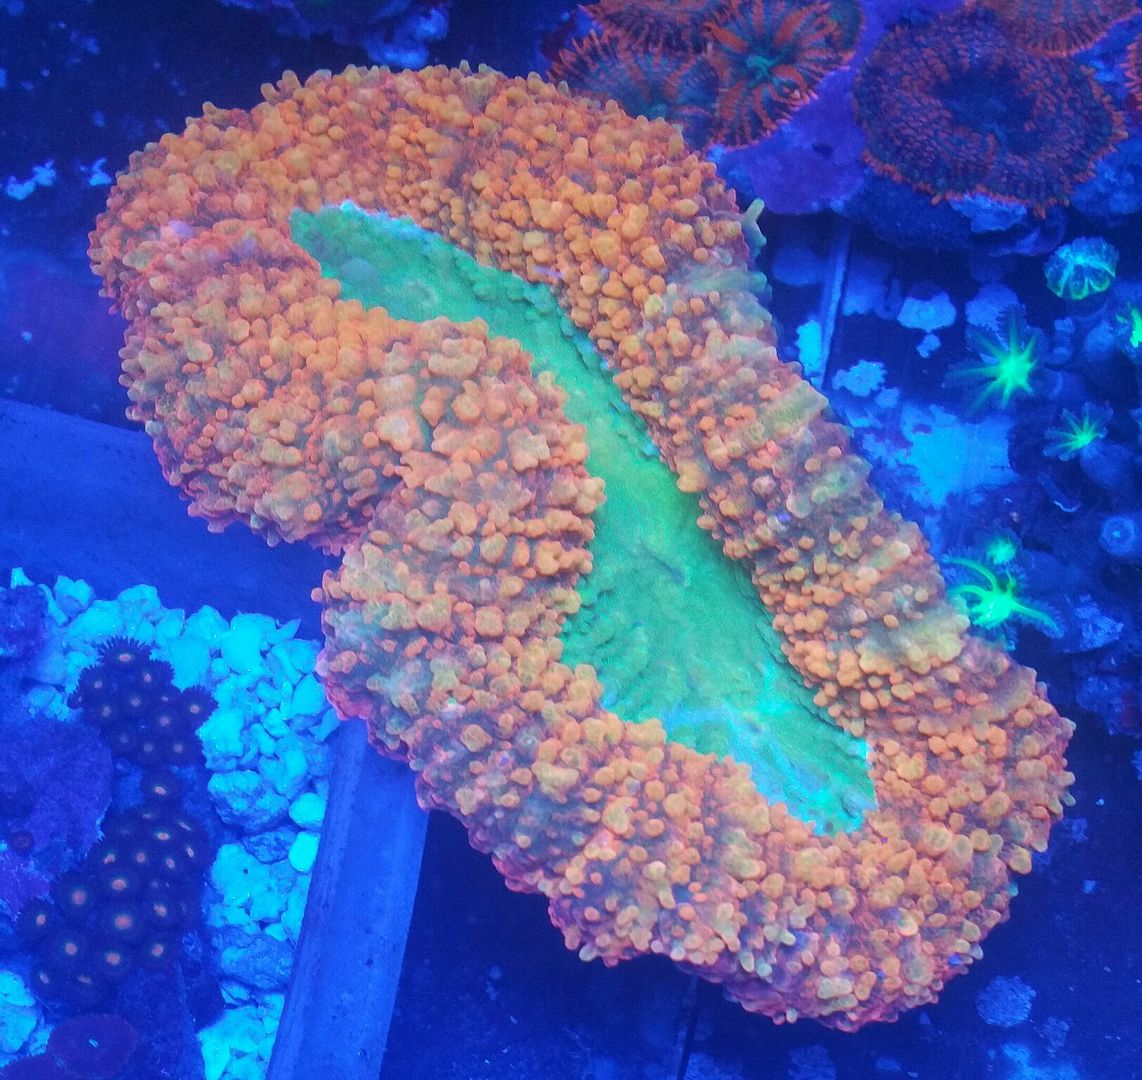 unspecified zps3xkyb9iy - Hand Picked Killer Corals @Tropicorium!!!